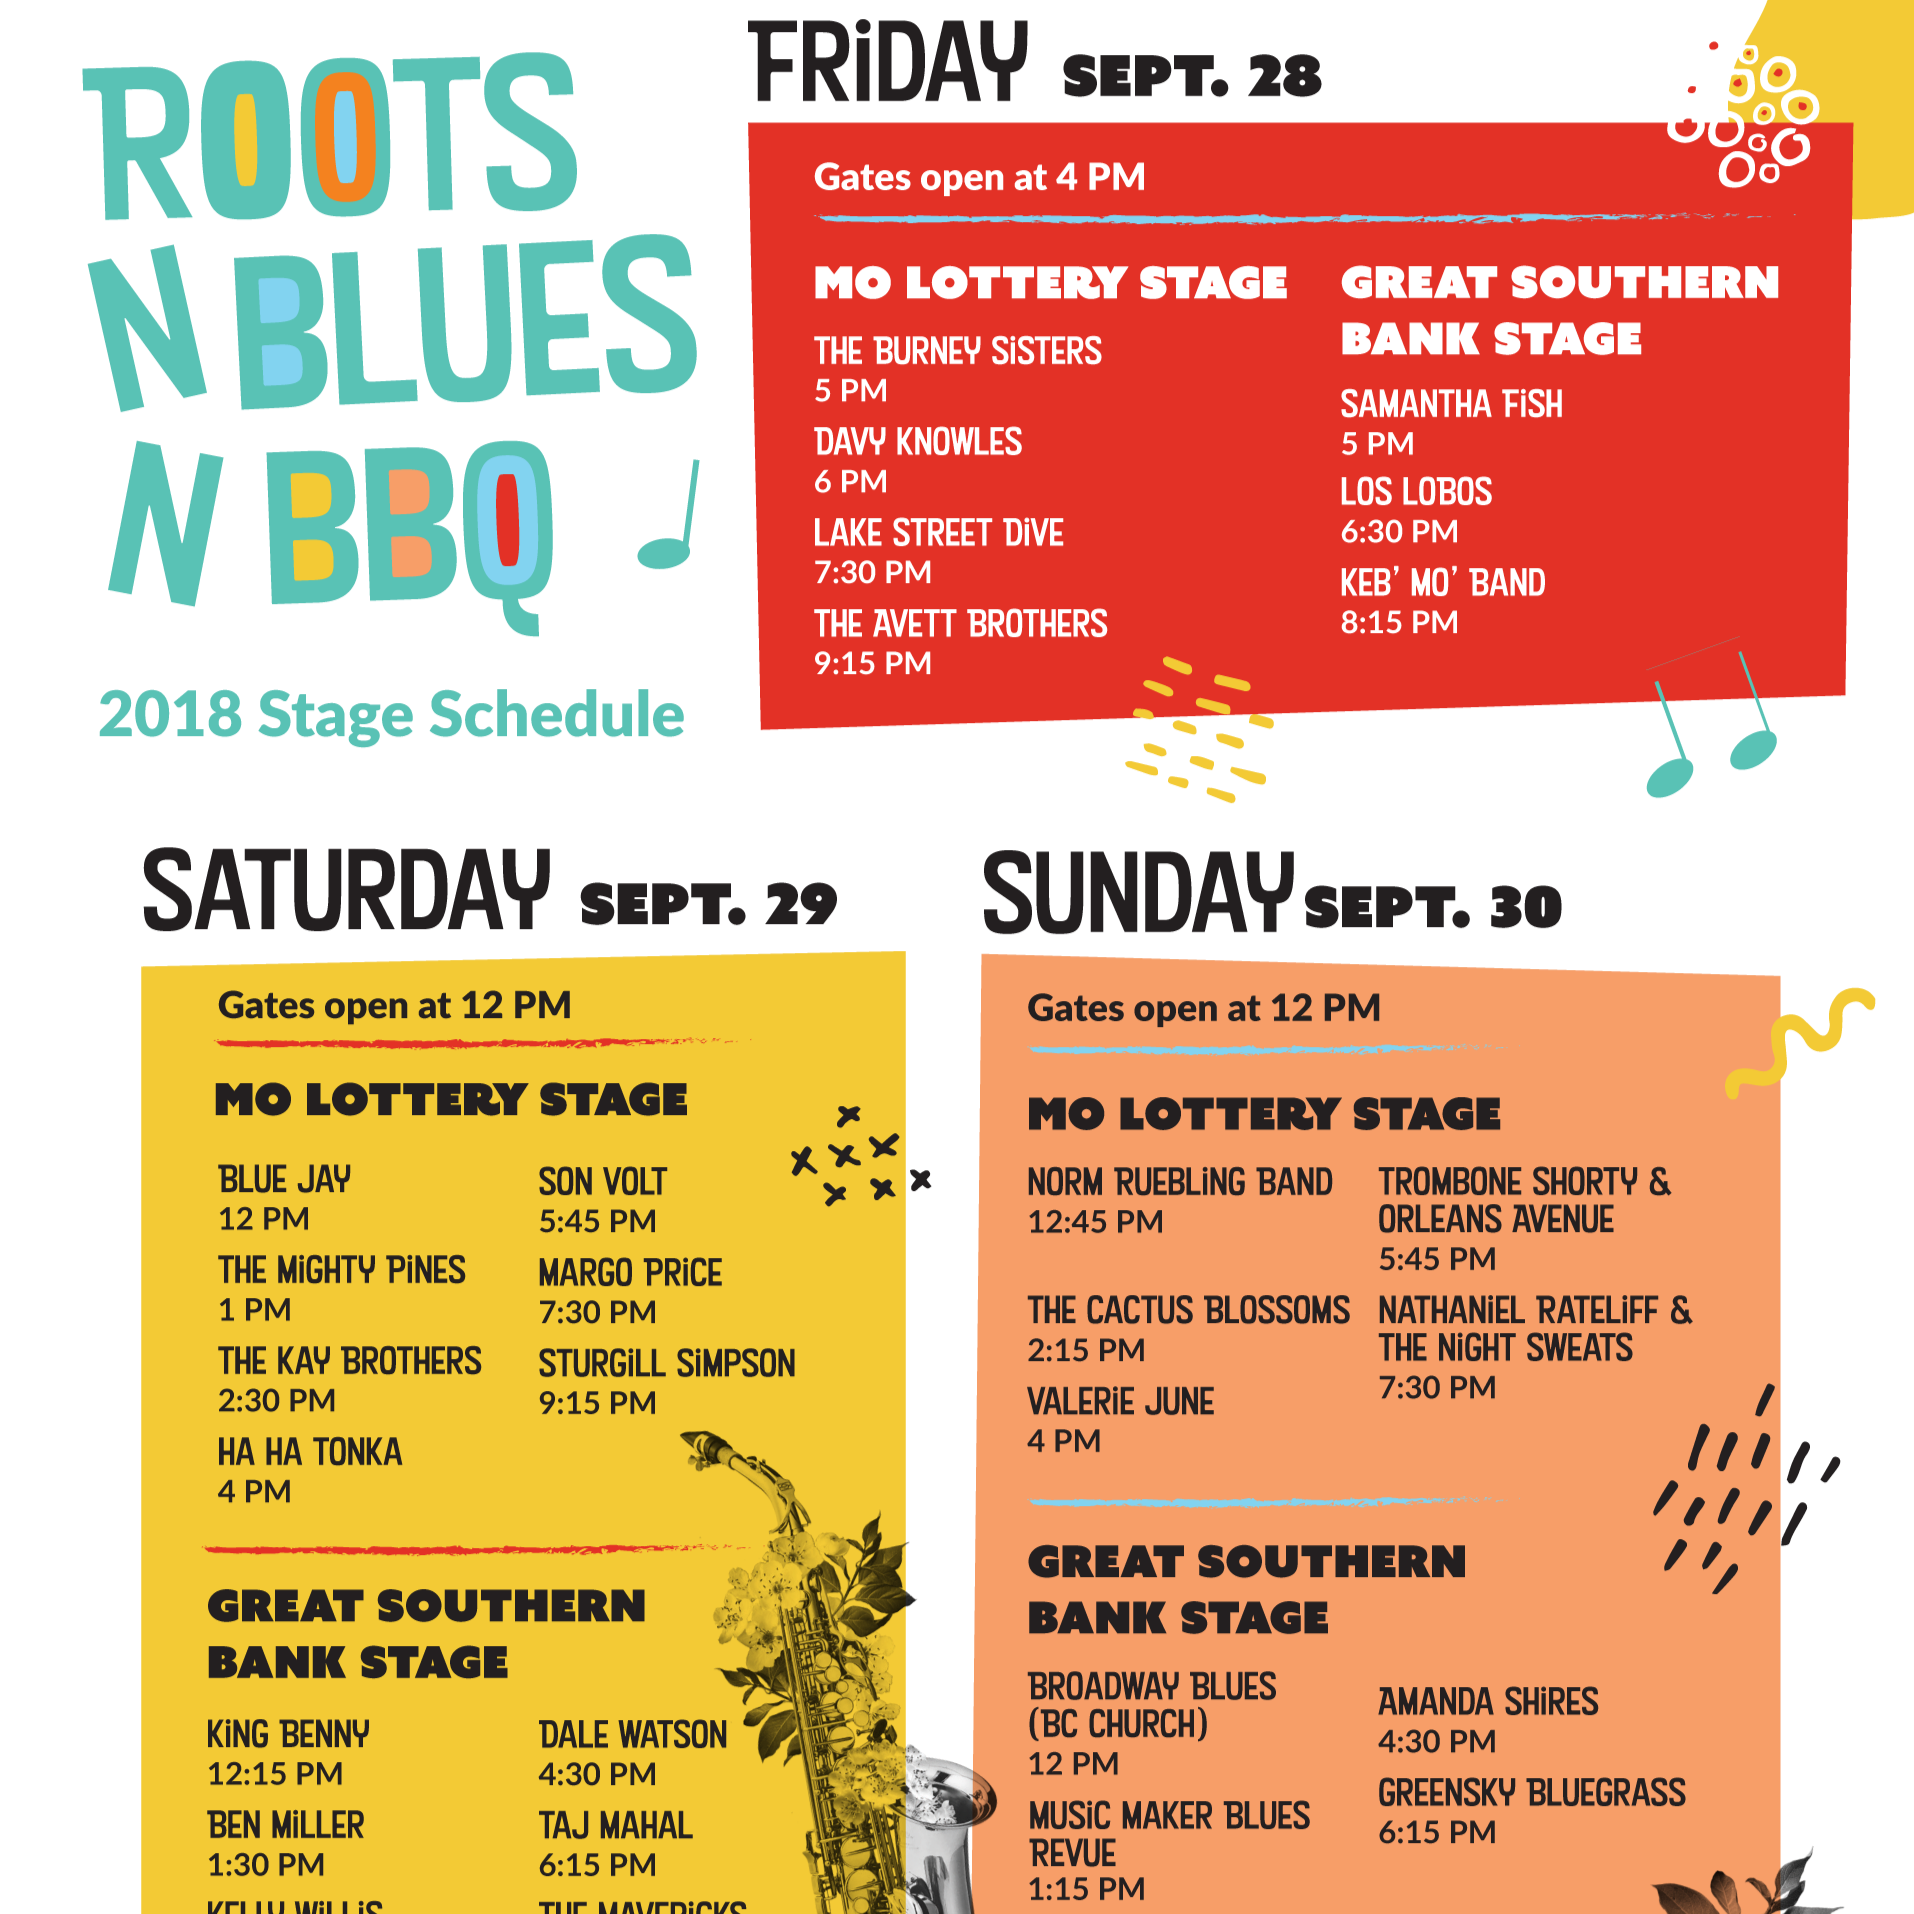 Roots-n-blues N Bbq's  Festival 2018 Tickets | Columbia 